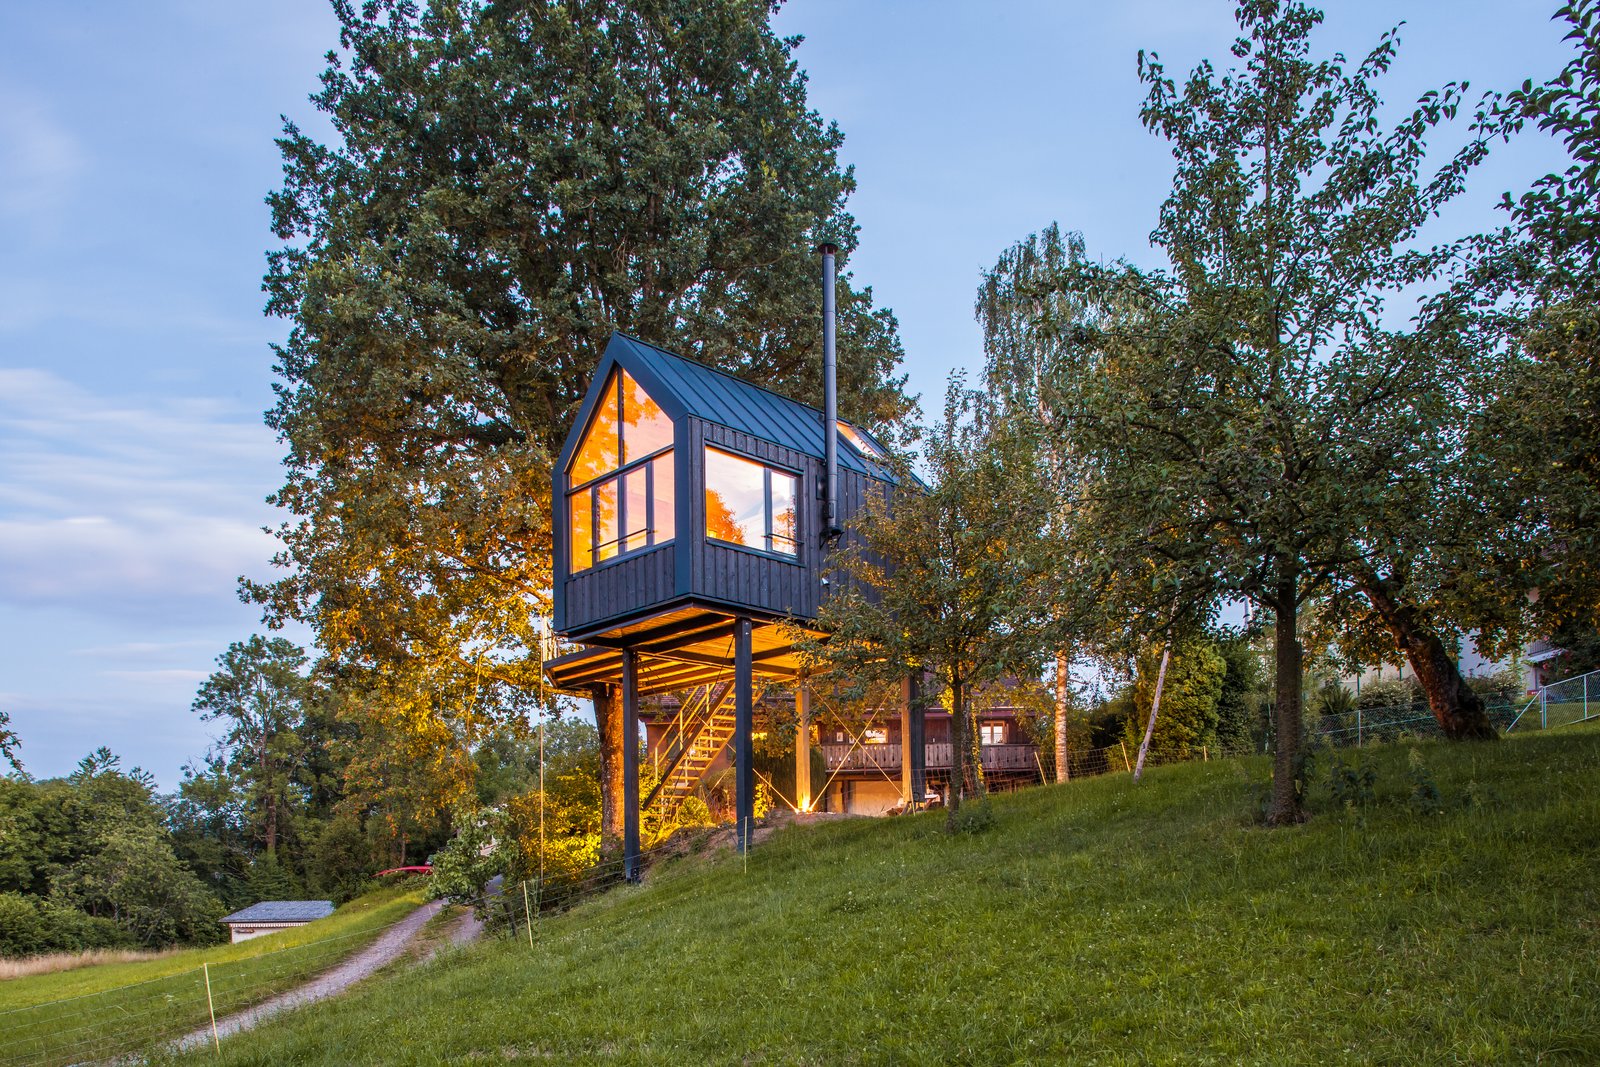 This Prefab Tree House Took Just 8 Days to Assemble